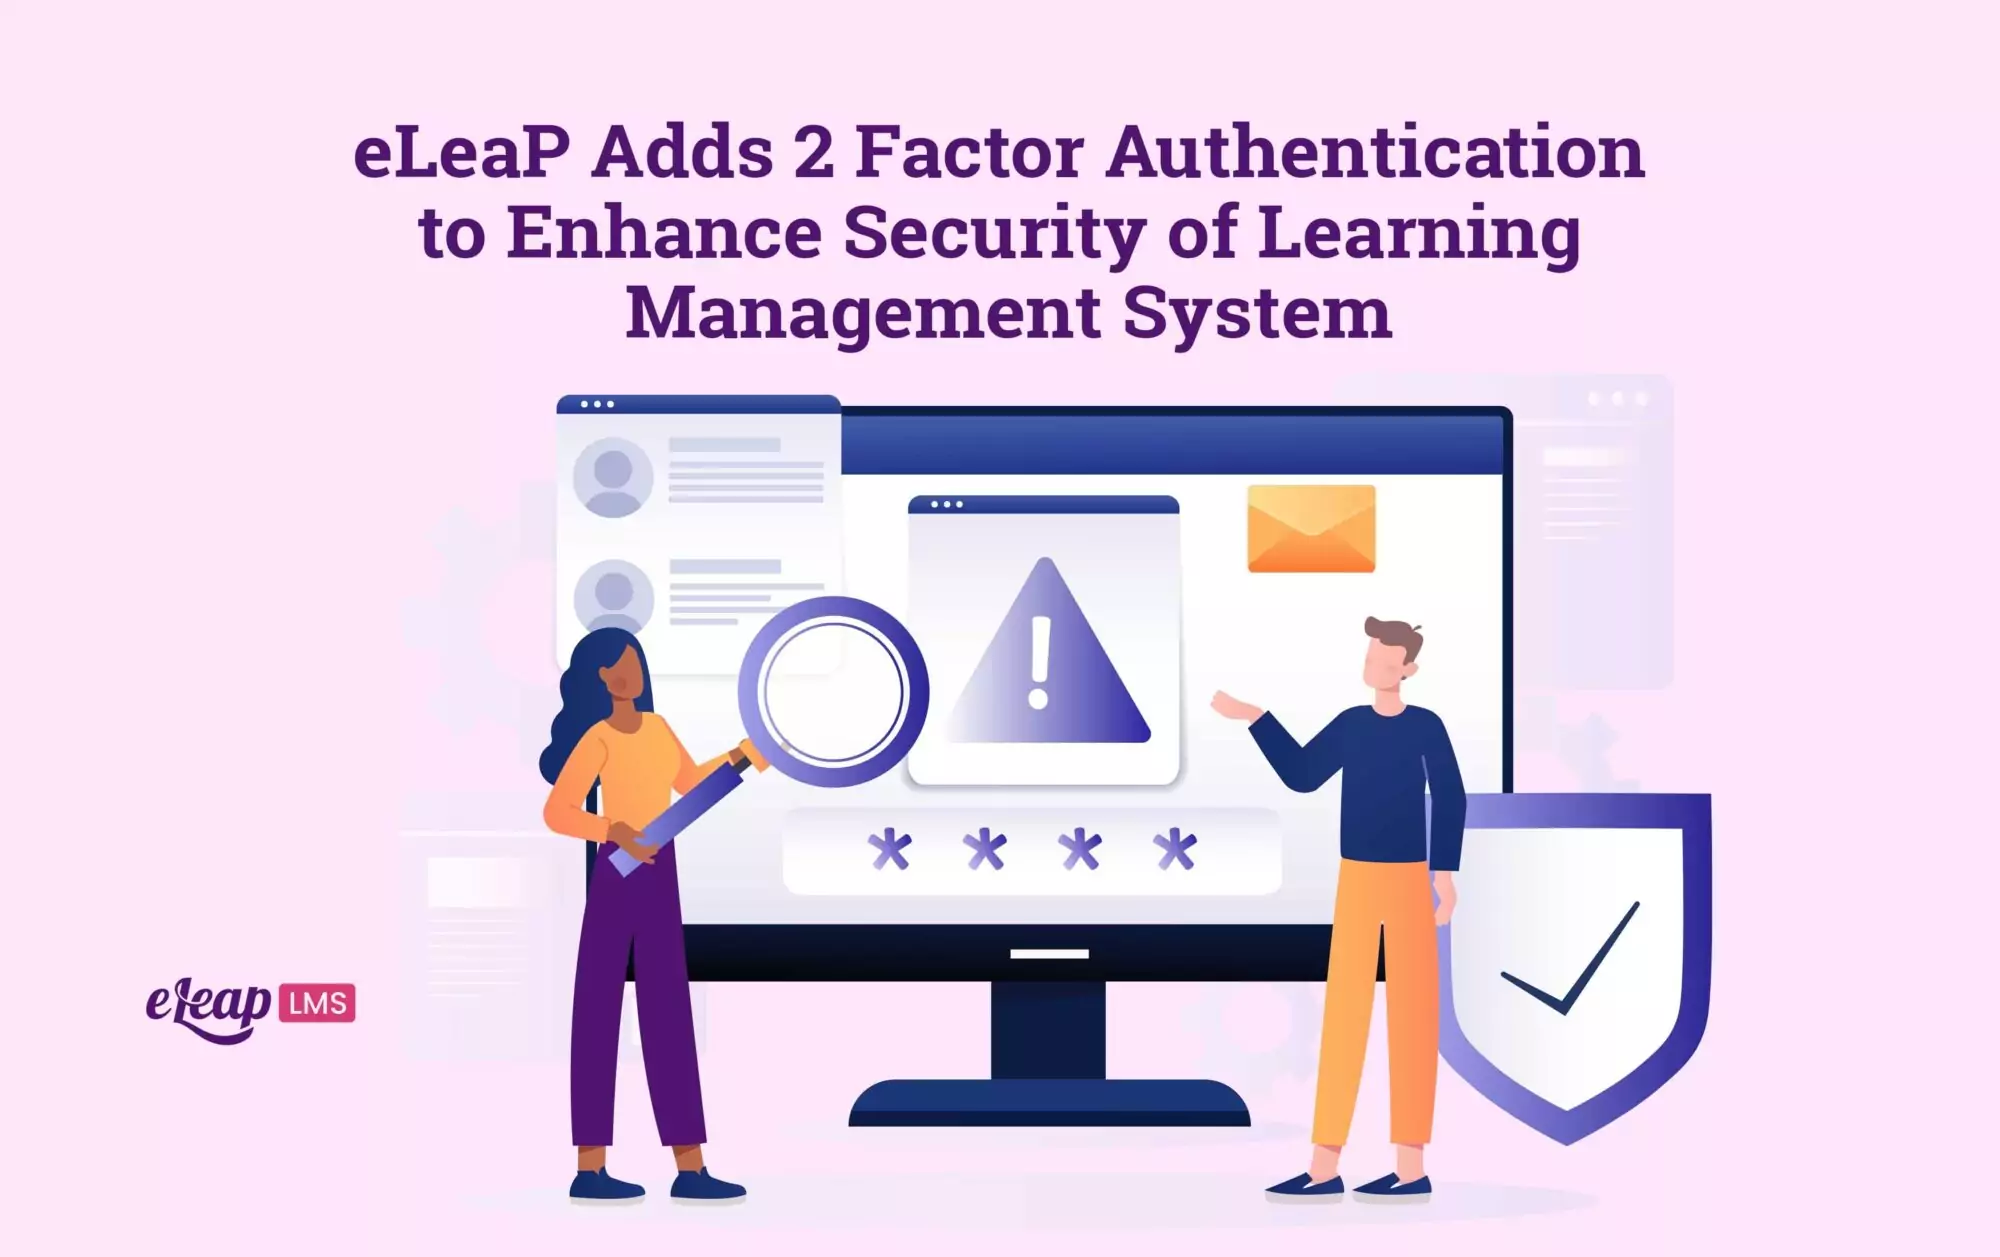 eLeaP Adds 2 Factor Authentication to Enhance Security of Learning Management System